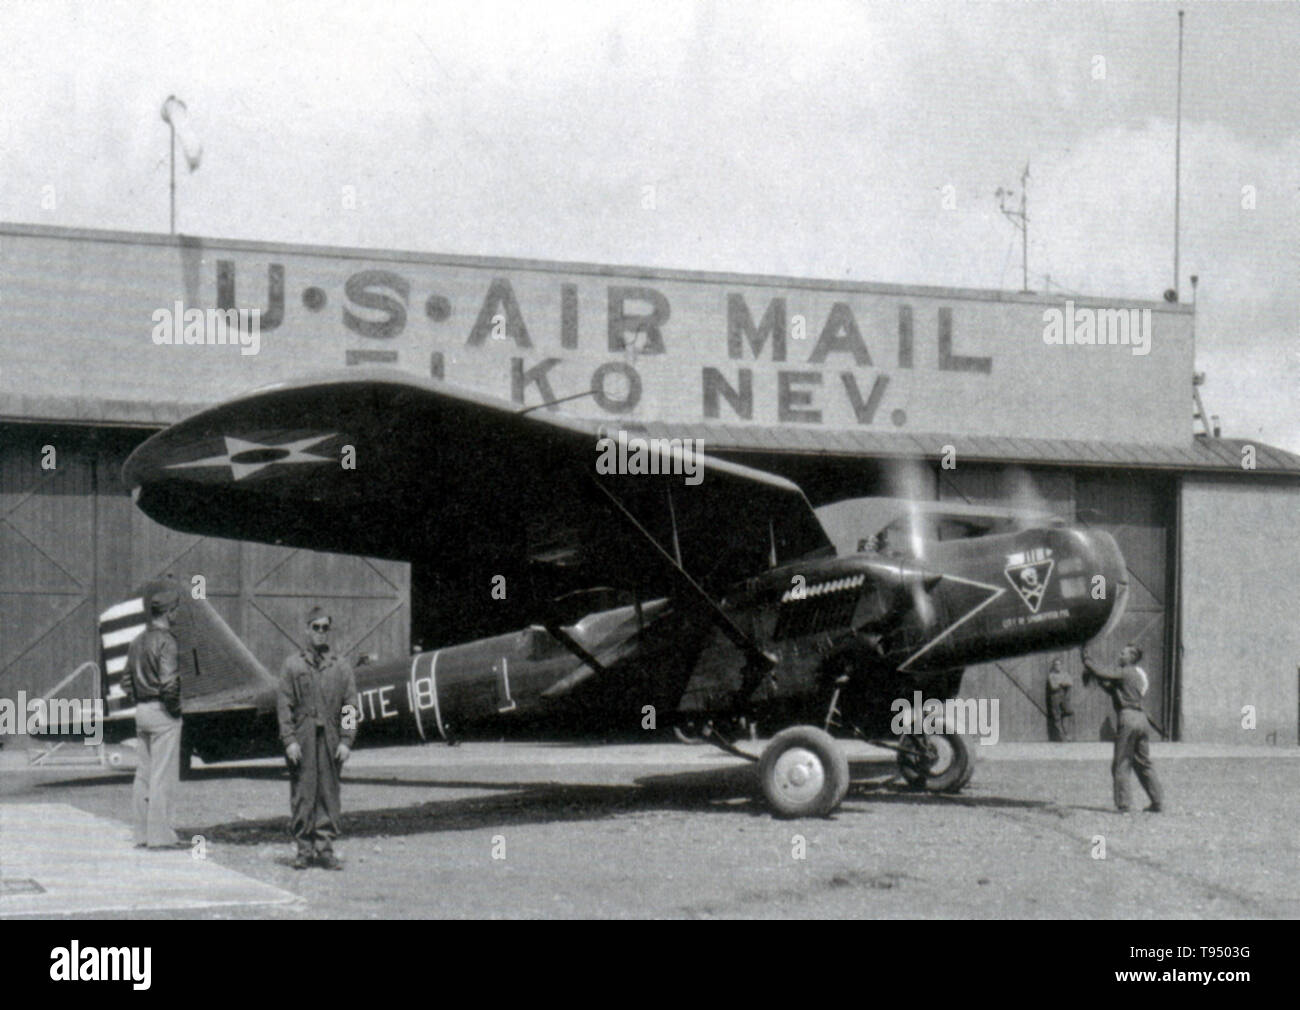 In February 1934, President Roosevelt cancelled all air mail contracts owing to a scandal relating to the award of contracts, thus initiating the Airmail Emergency, where the Air Corps was tasked with carrying the mail until new contracts could be awarded. Stock Photo